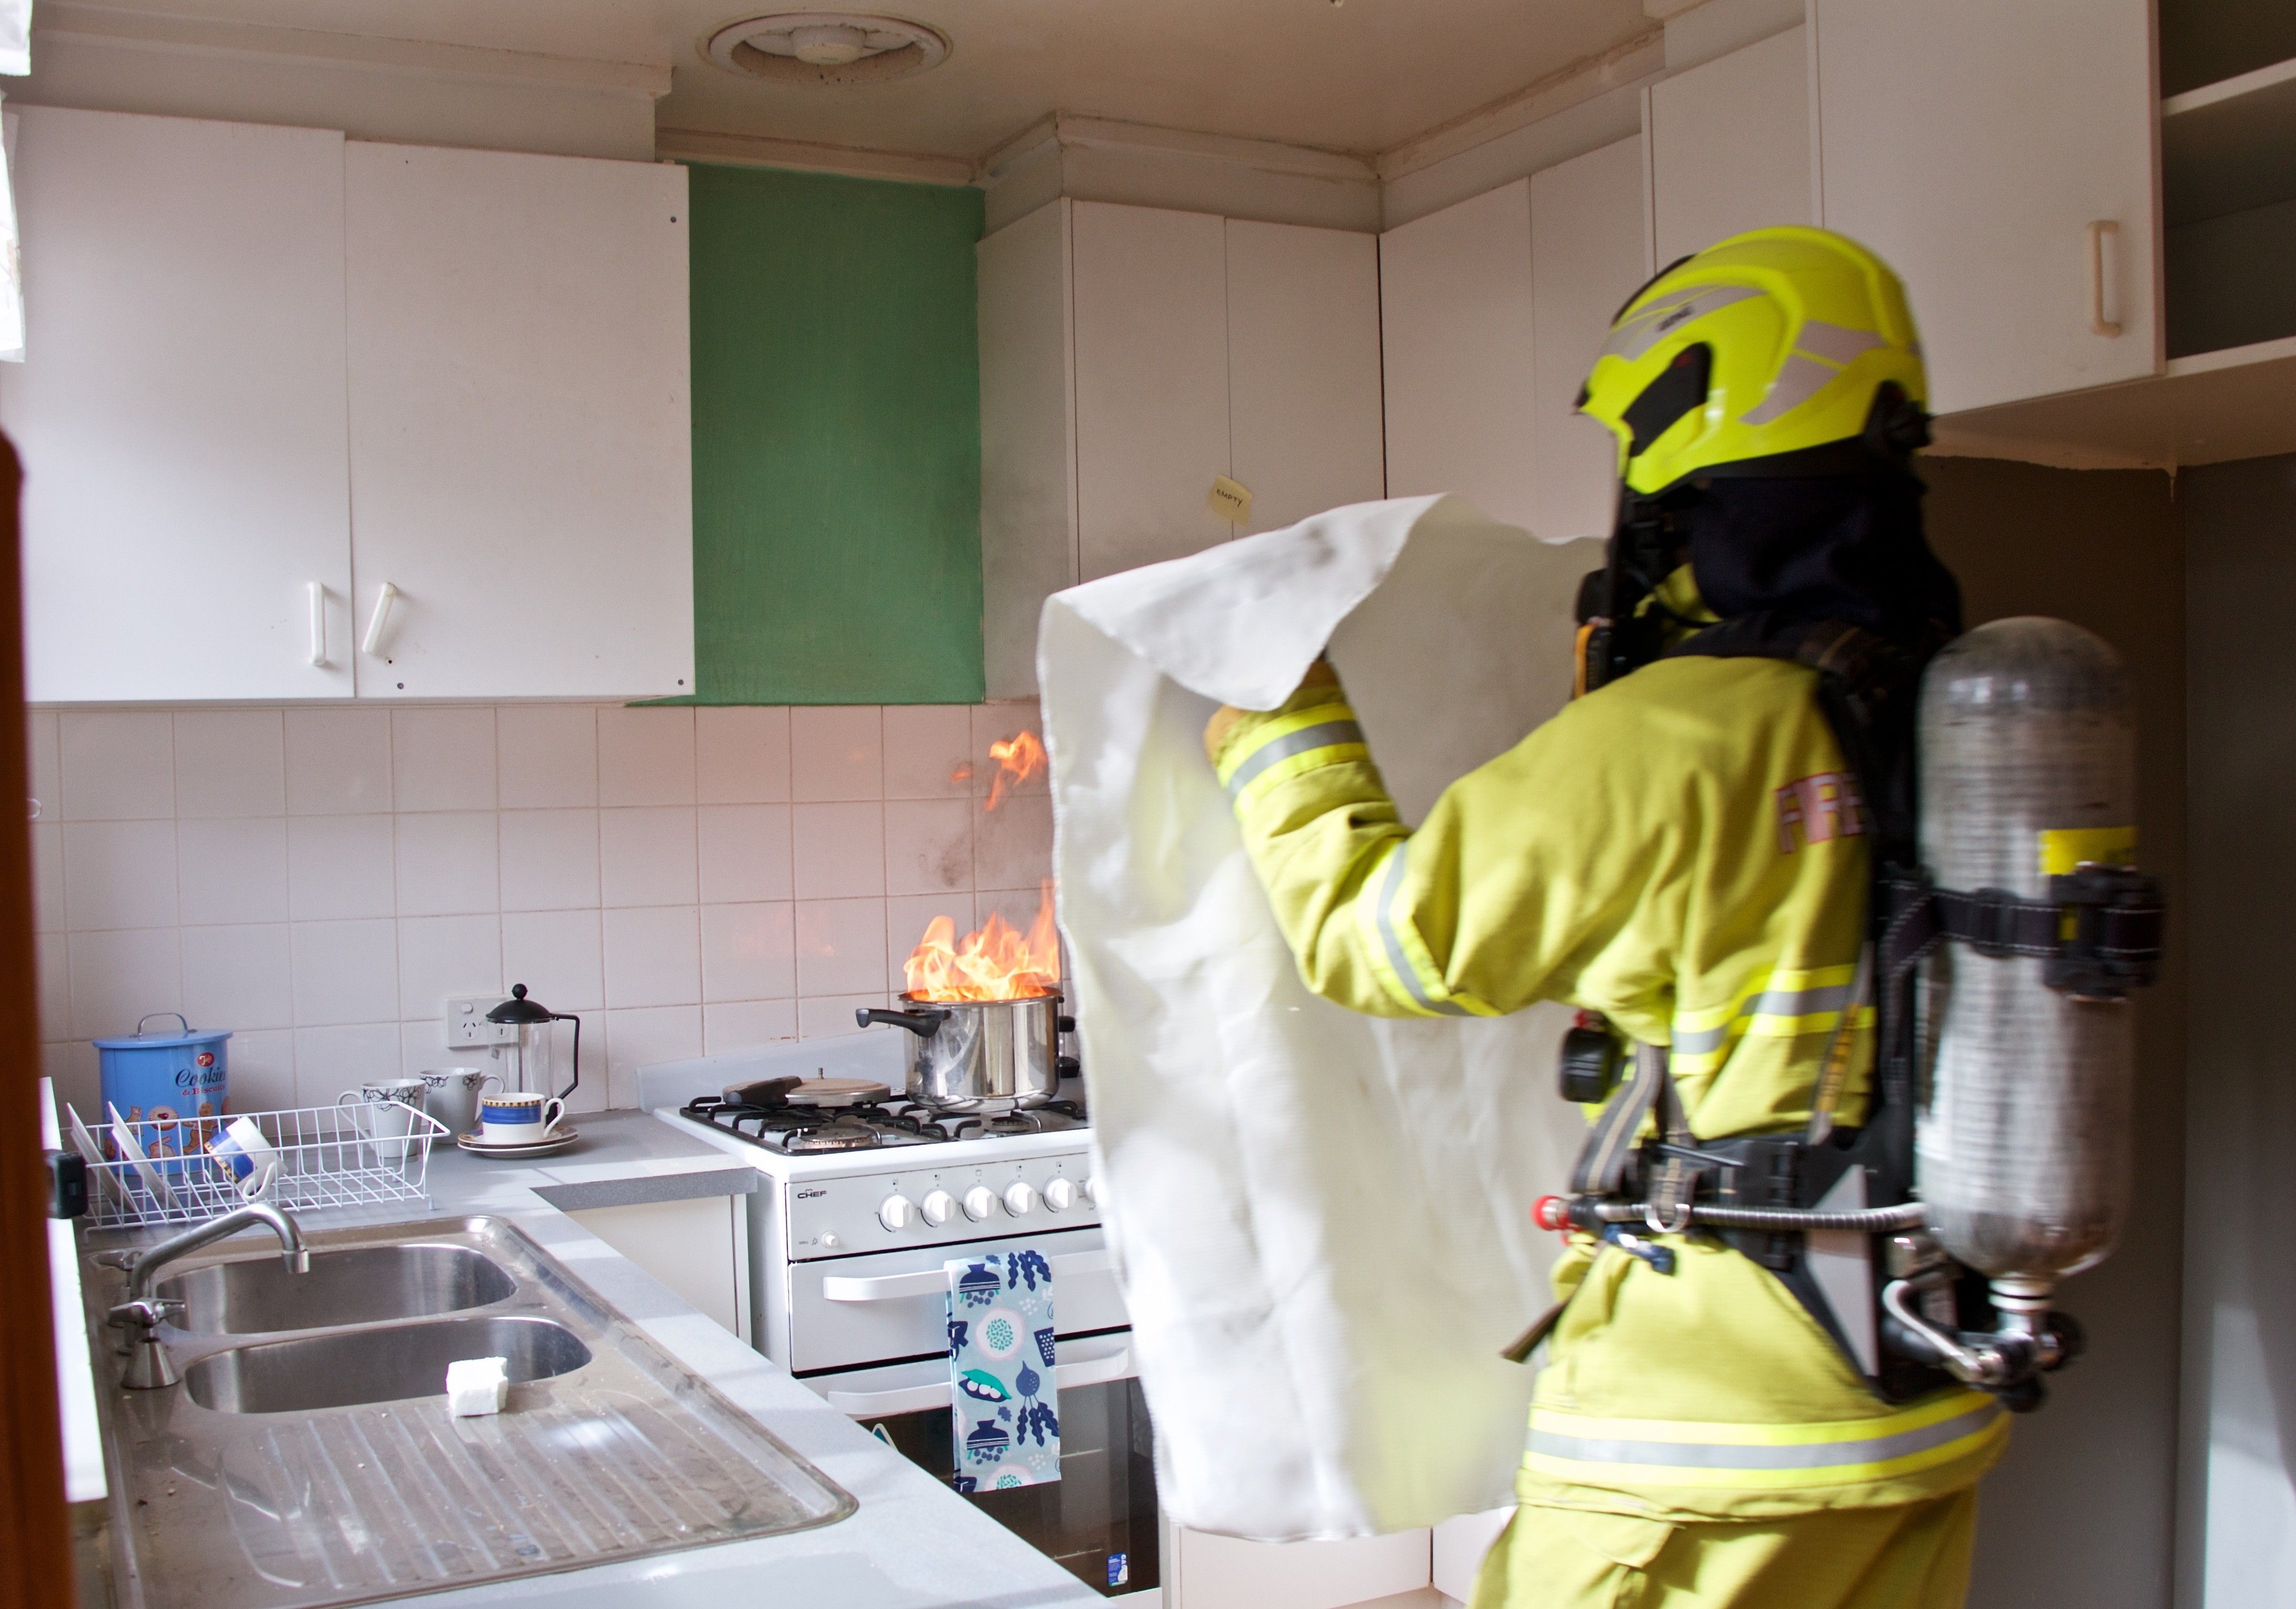 Could you control a small house fire?